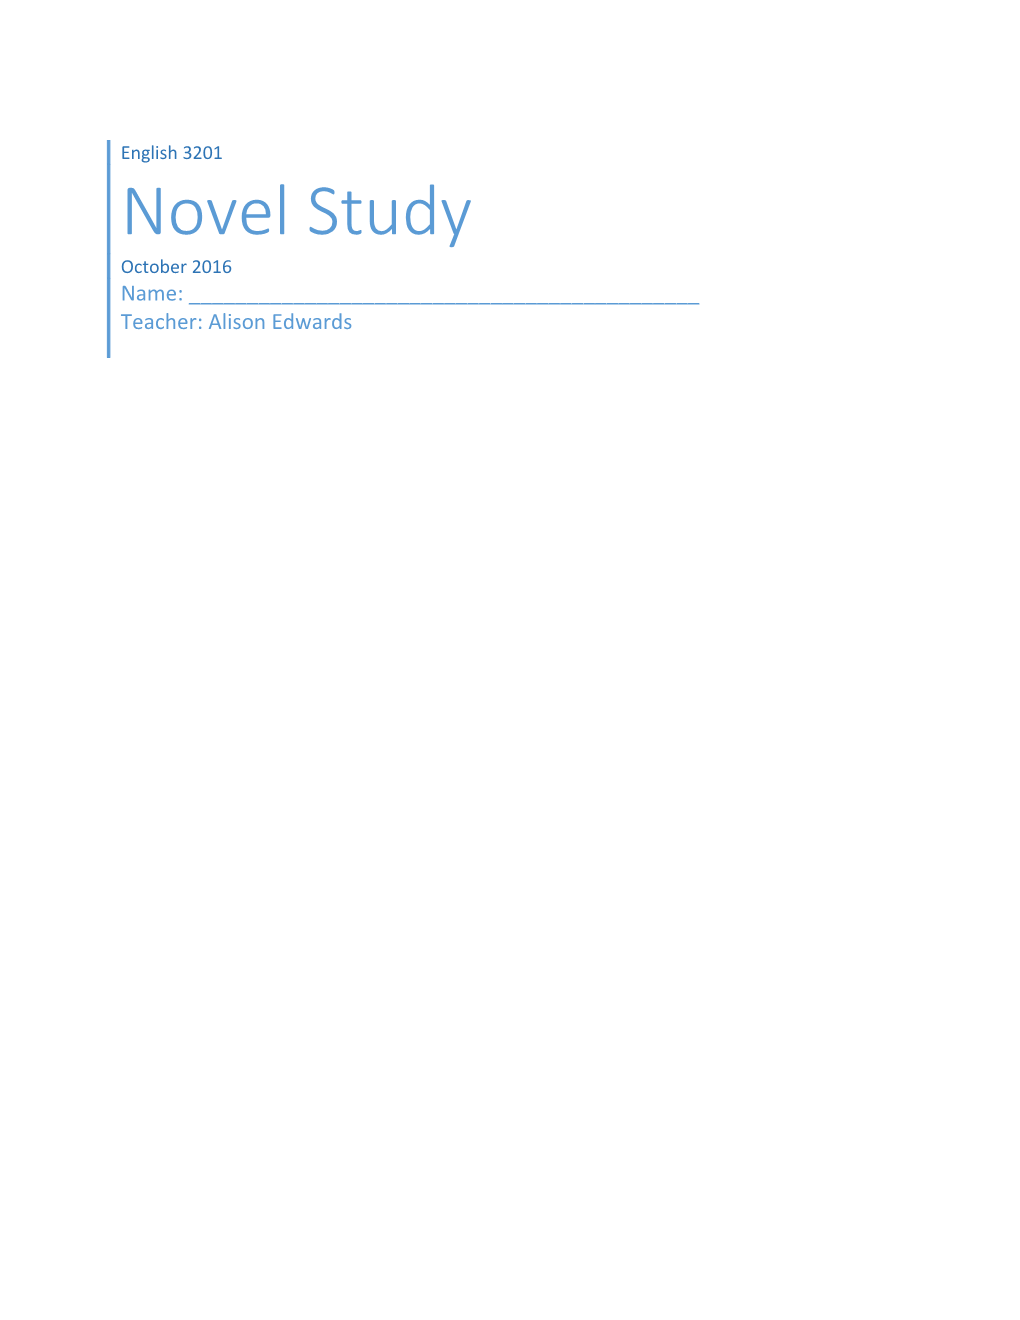 October 18, 2016 Introduction to Novel Study